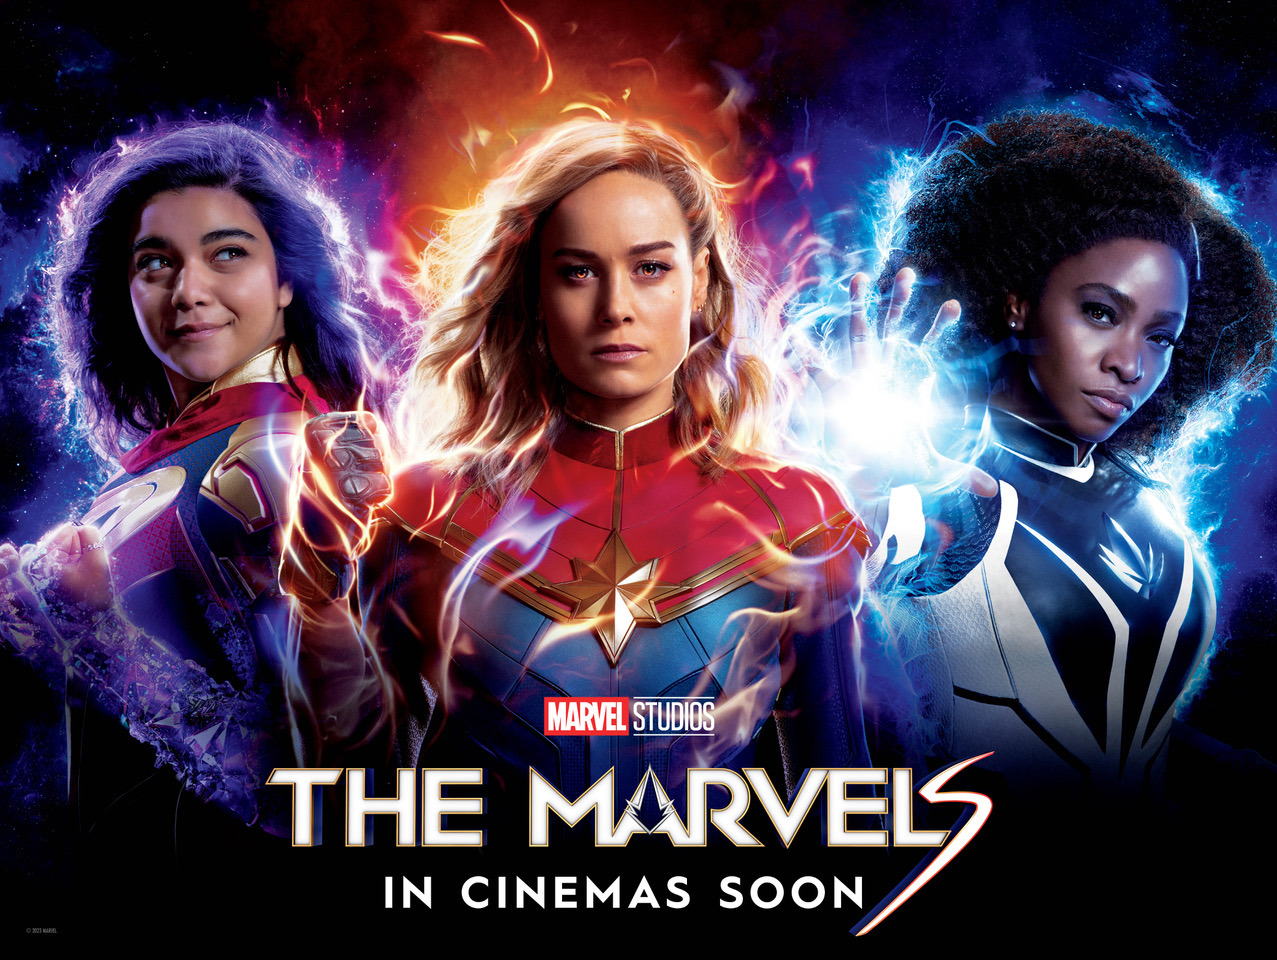 Extra Large Movie Poster Image for The Marvels (#17 of 19)